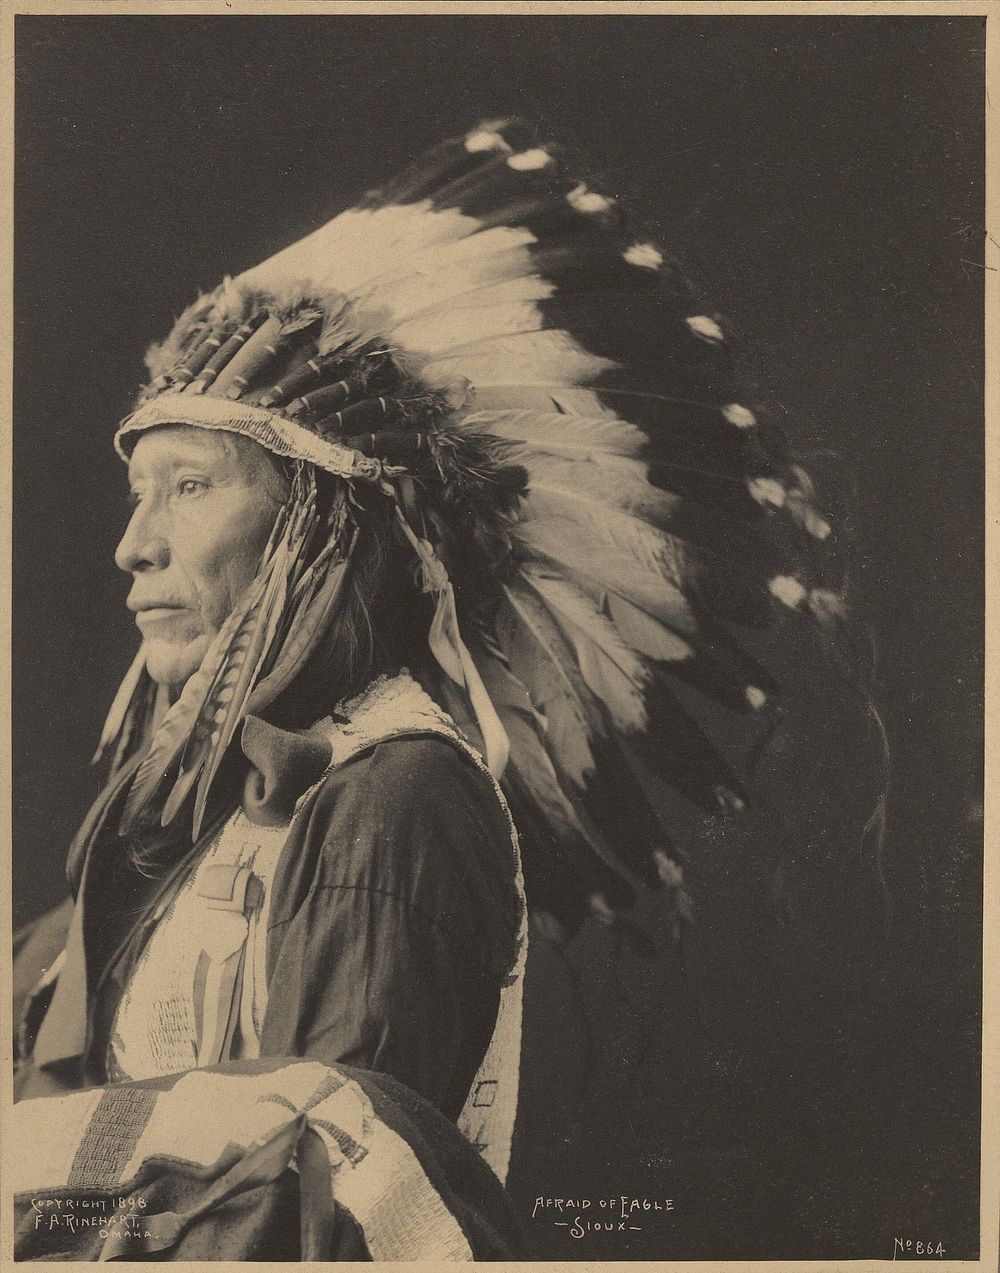 Afraid of Eagle, Sioux by Adolph F Muhr and Frank A Rinehart